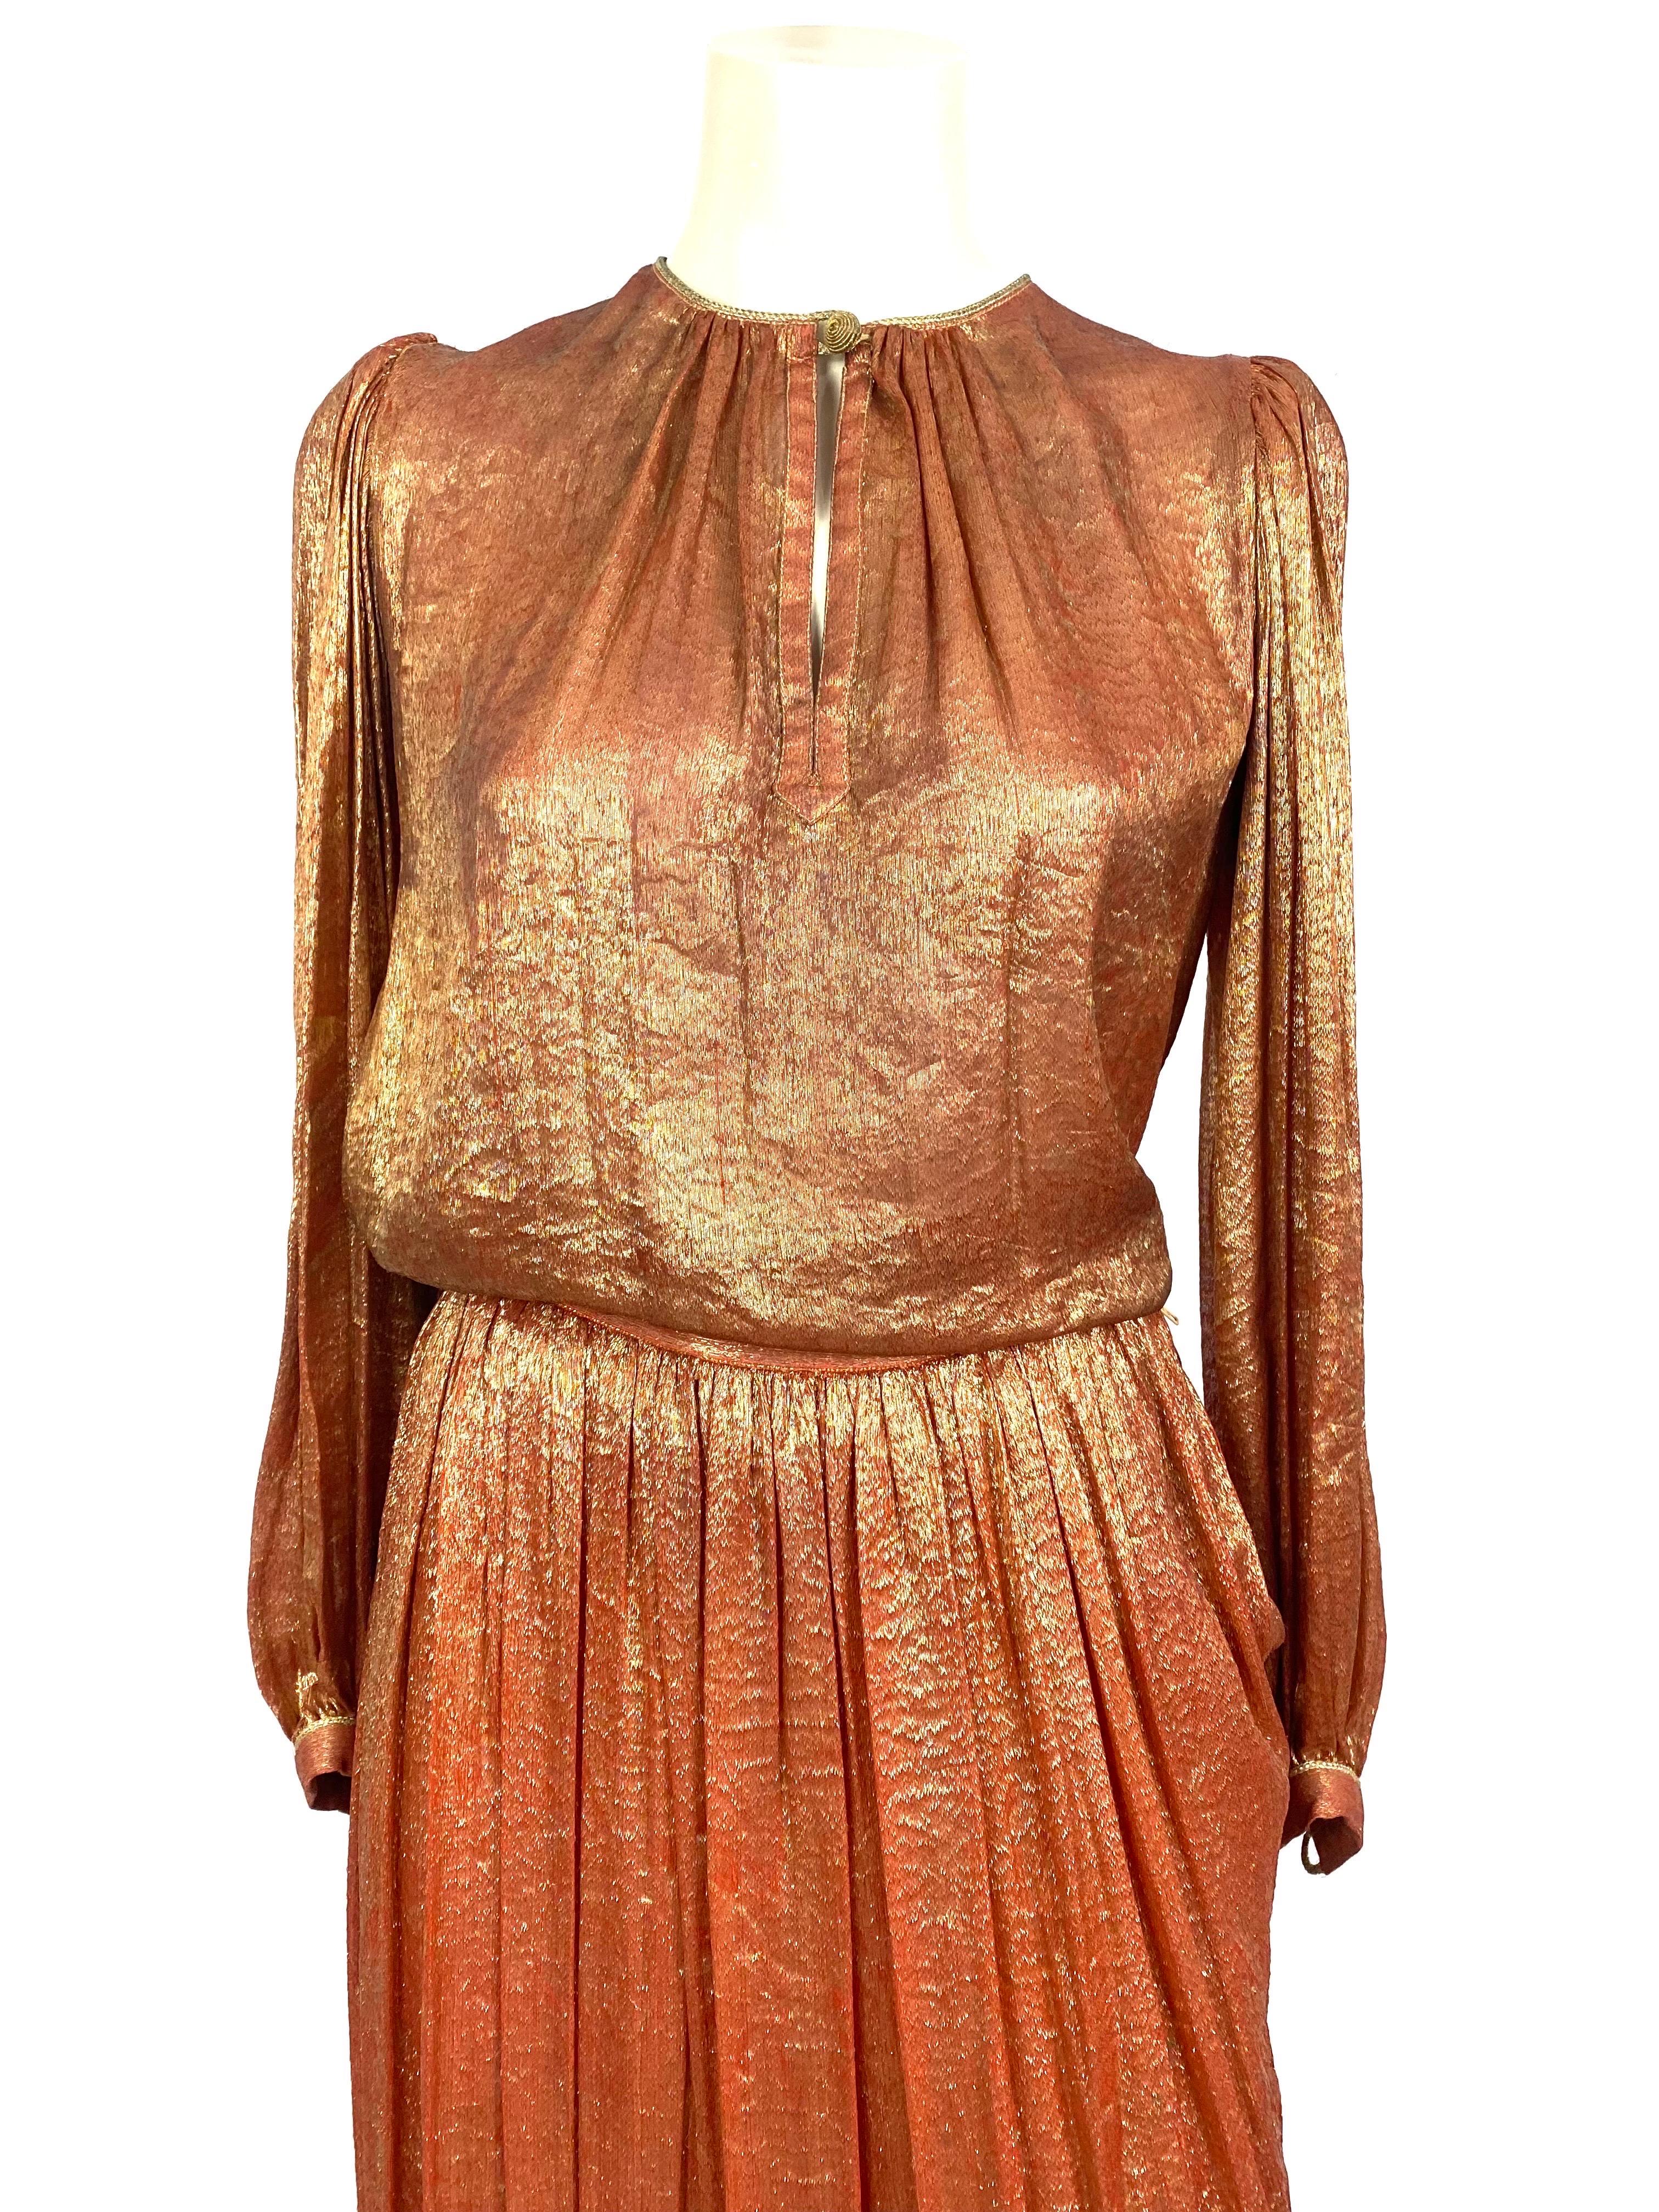 Stunning vintage 2-piece set from 1976 by Yves Saint Laurent in gold and bronze silk lamé, Slavic inspiration.
The blouse, balloon sleeves and pleats on the shoulders, round neck closing with a pretty twisted trimming button and a teardrop